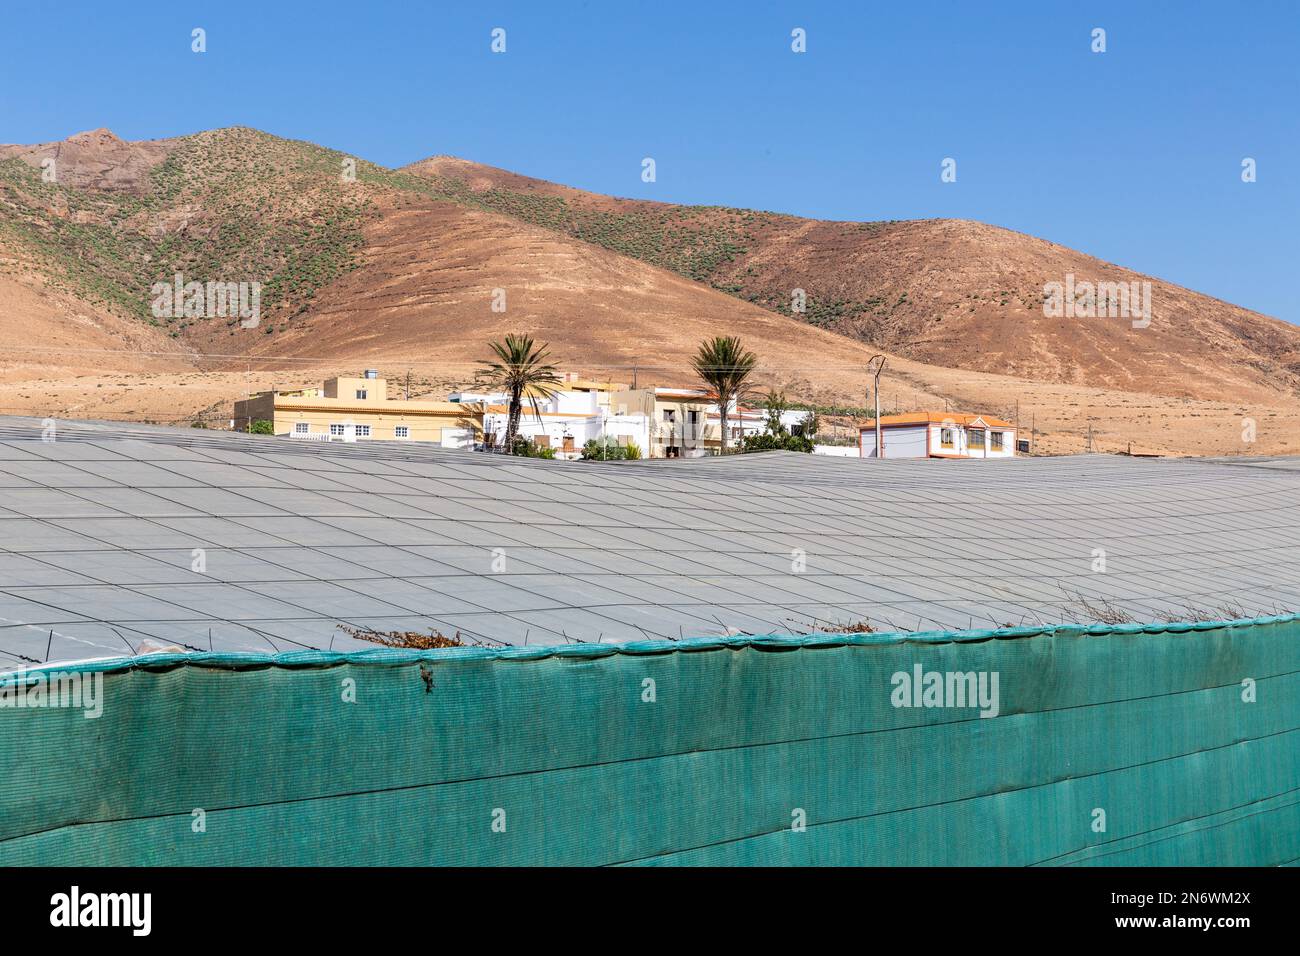 A few dwellings against the backdrop of arid hills. Sunscreen in the foreground. Pajara, Fuerteventura. Stock Photo